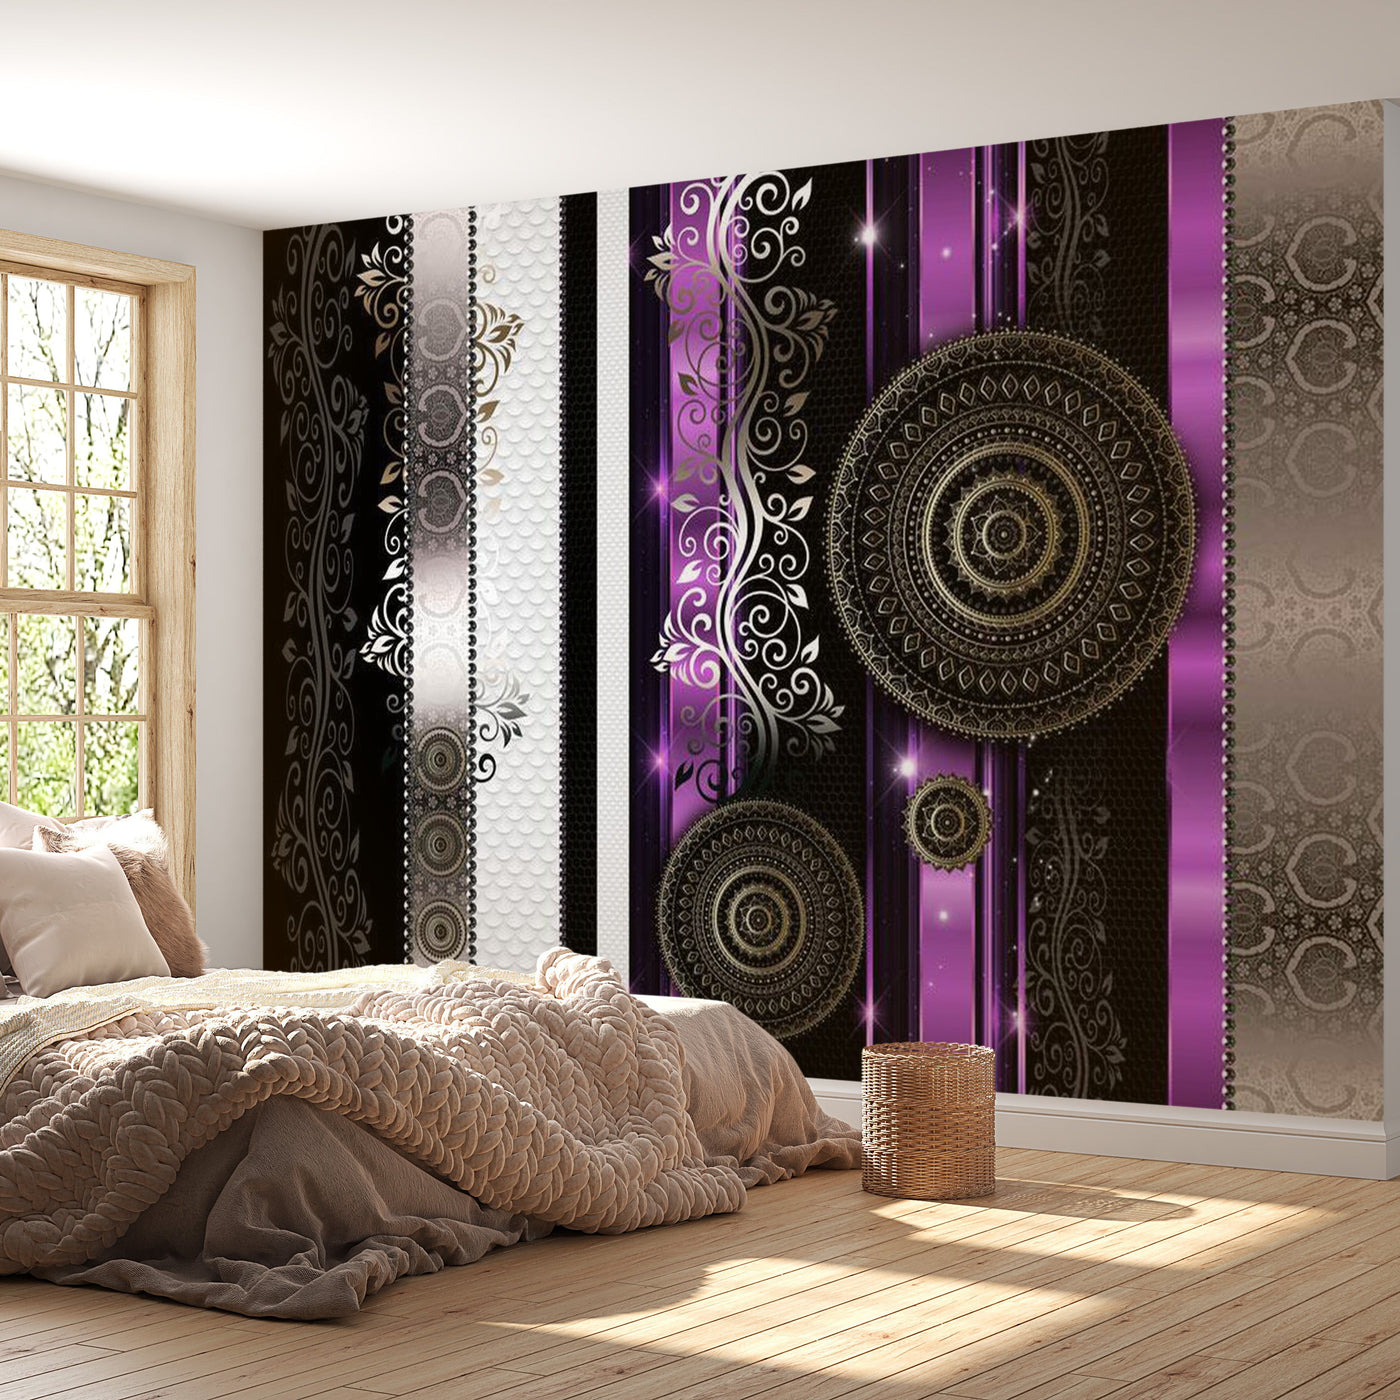 Peel & Stick Glam Wall Mural - Purple Harmony - Removable Wall Decals